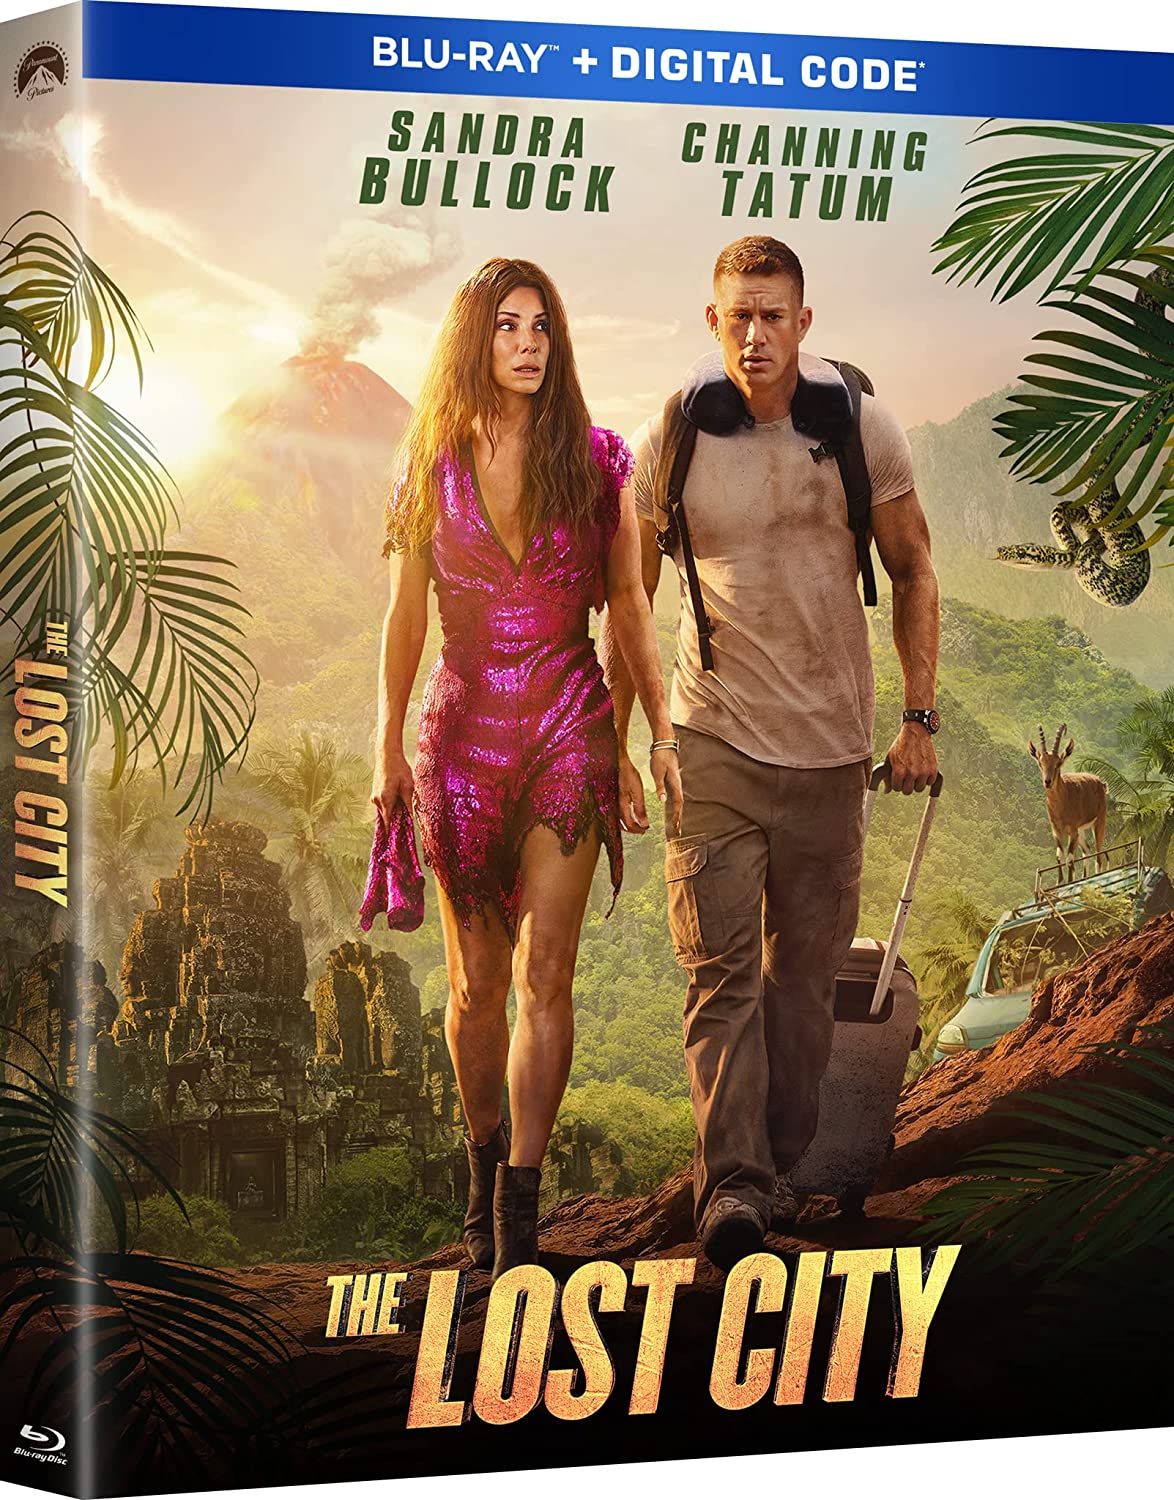 The Lost City Blu-ray